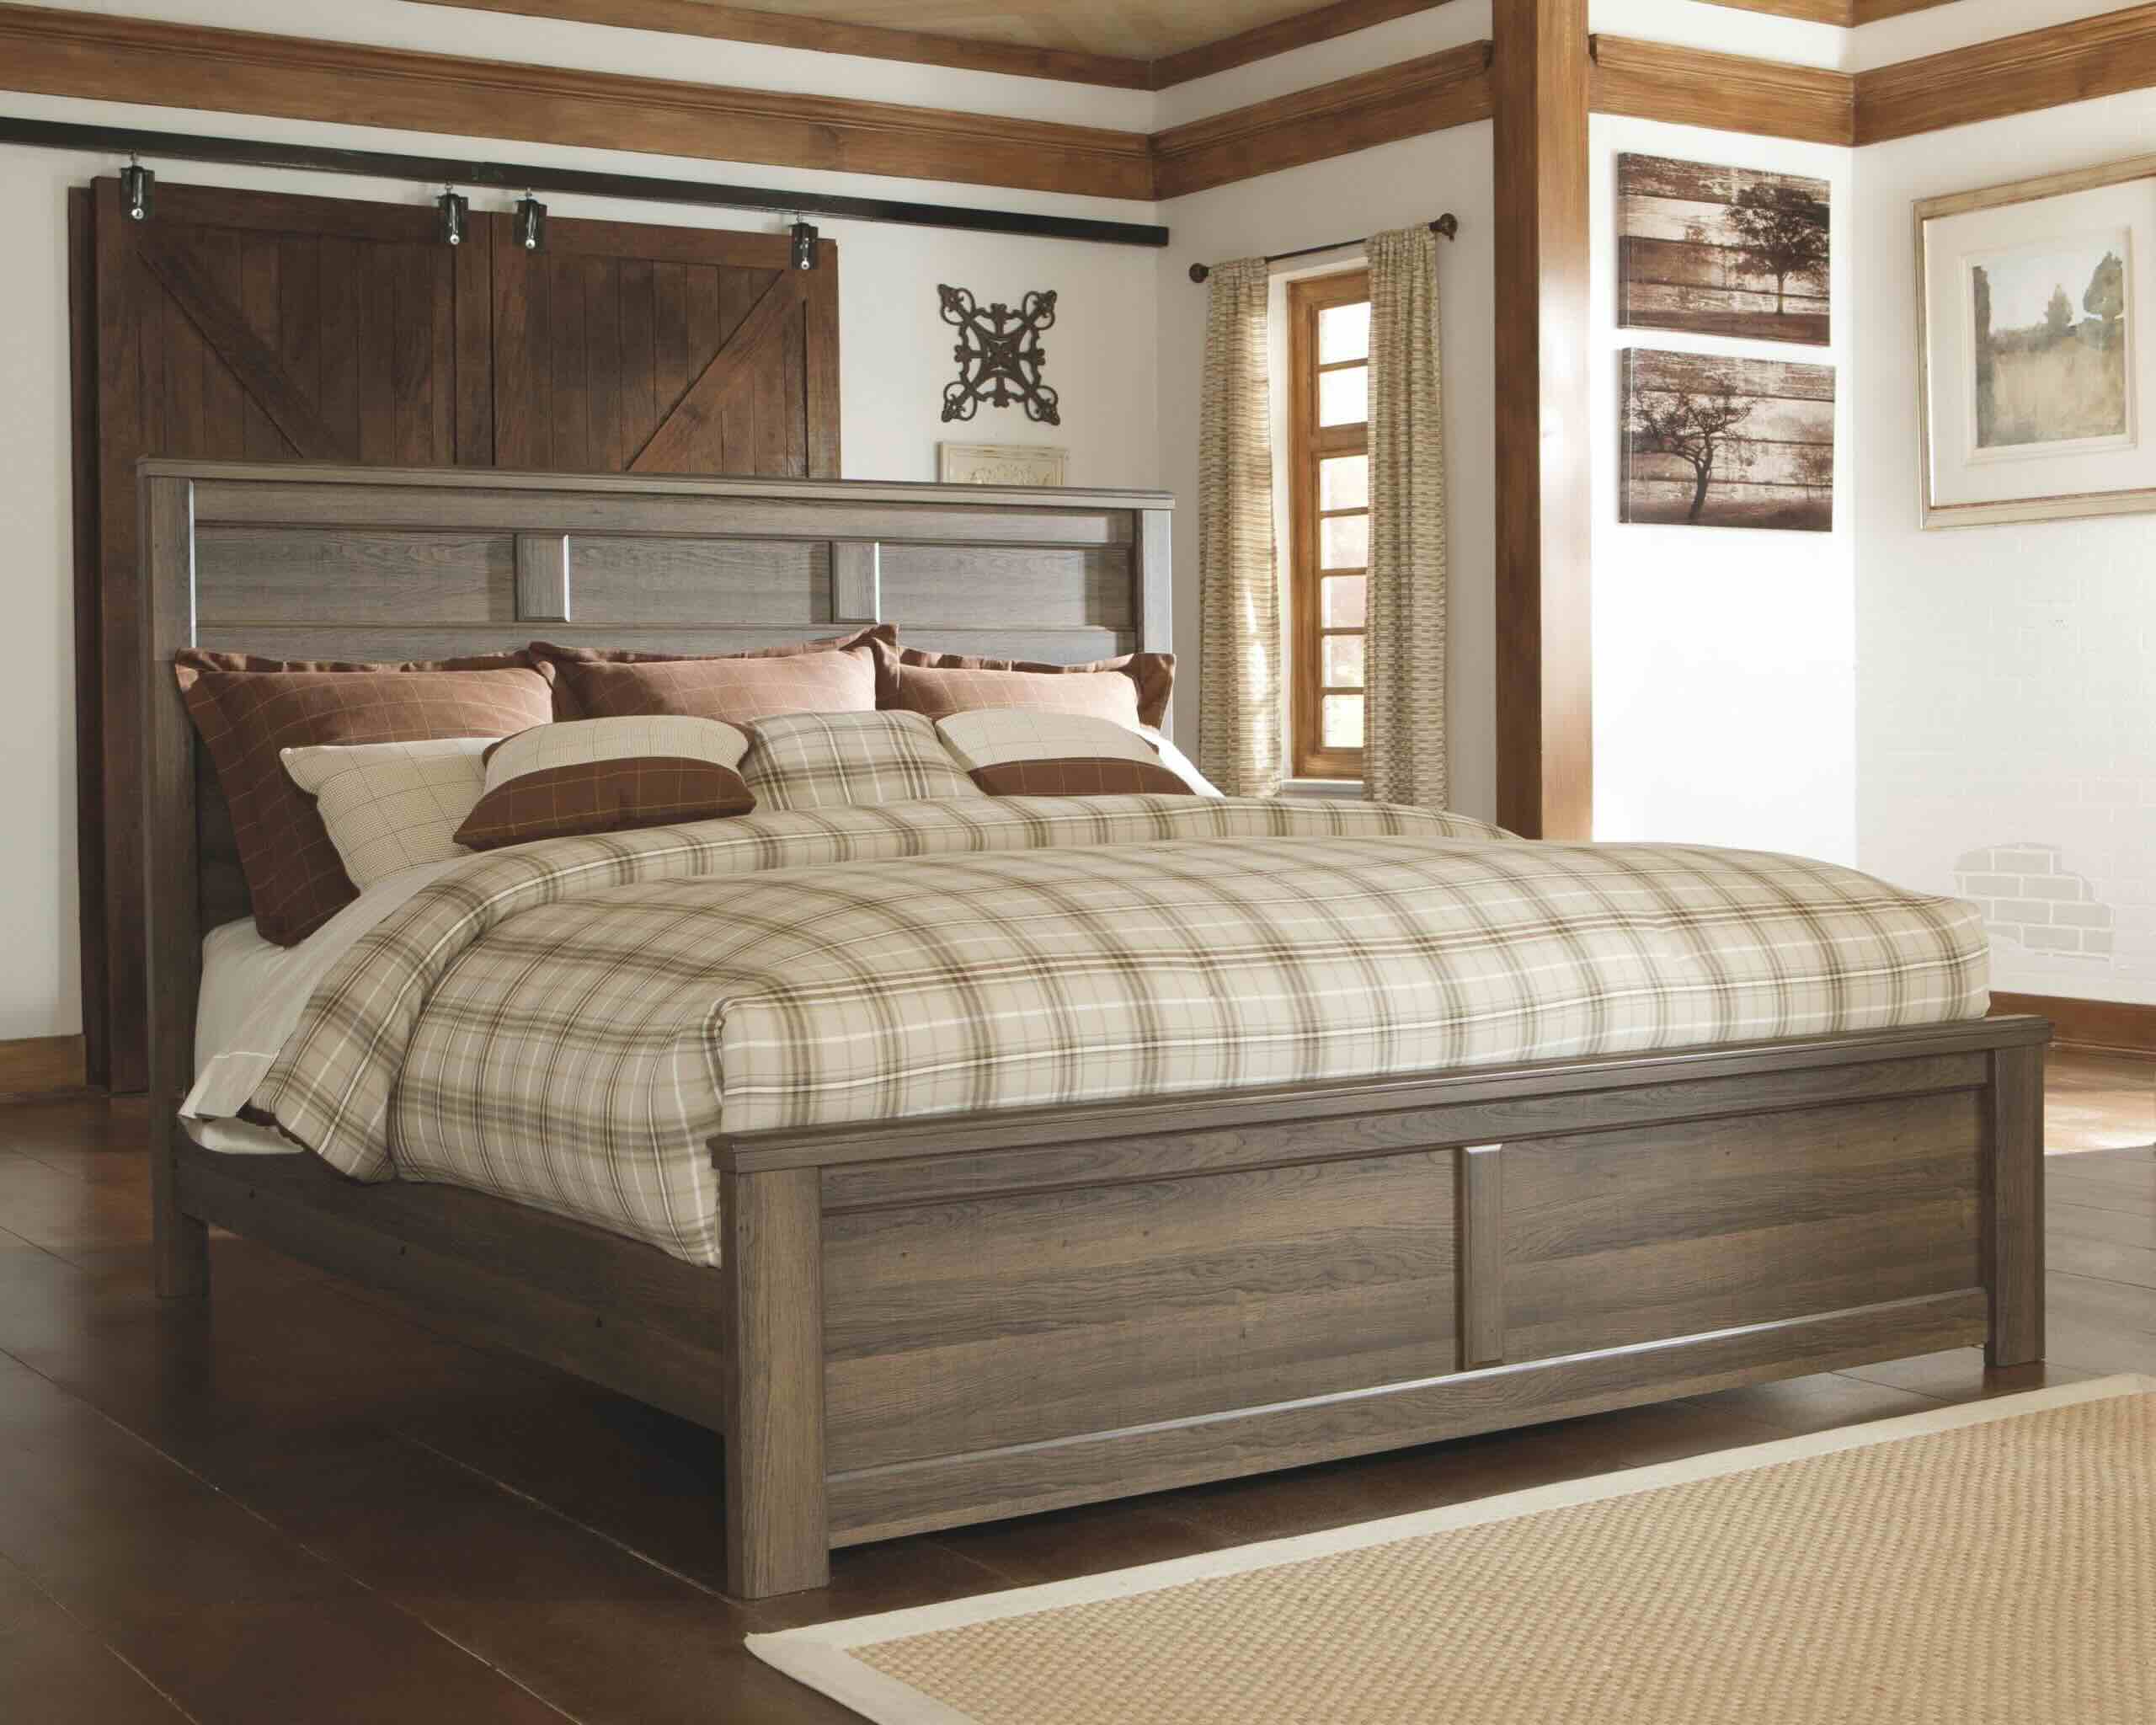 What Size Is A California King Bed Frame